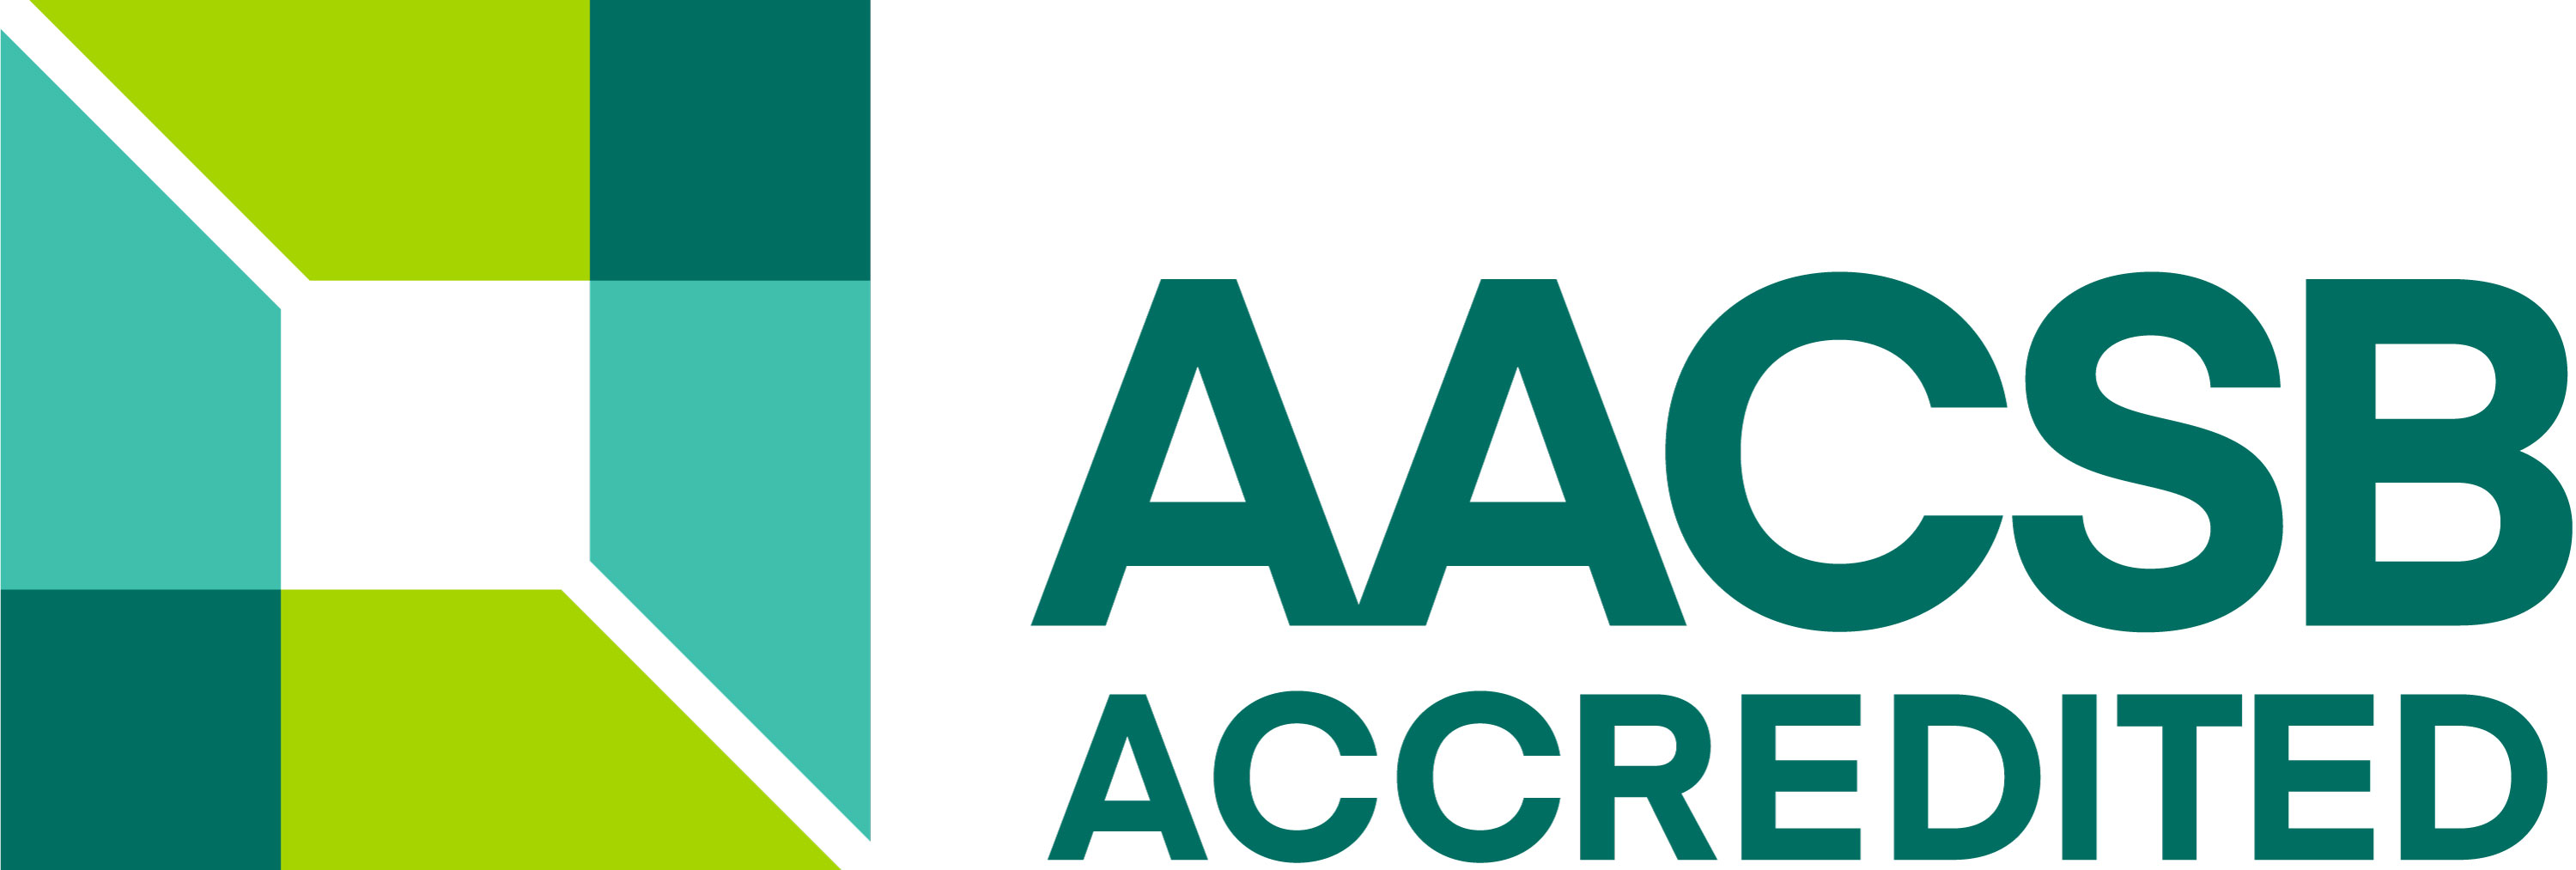 aacsb-logo-accredited-color-rgb.jpg